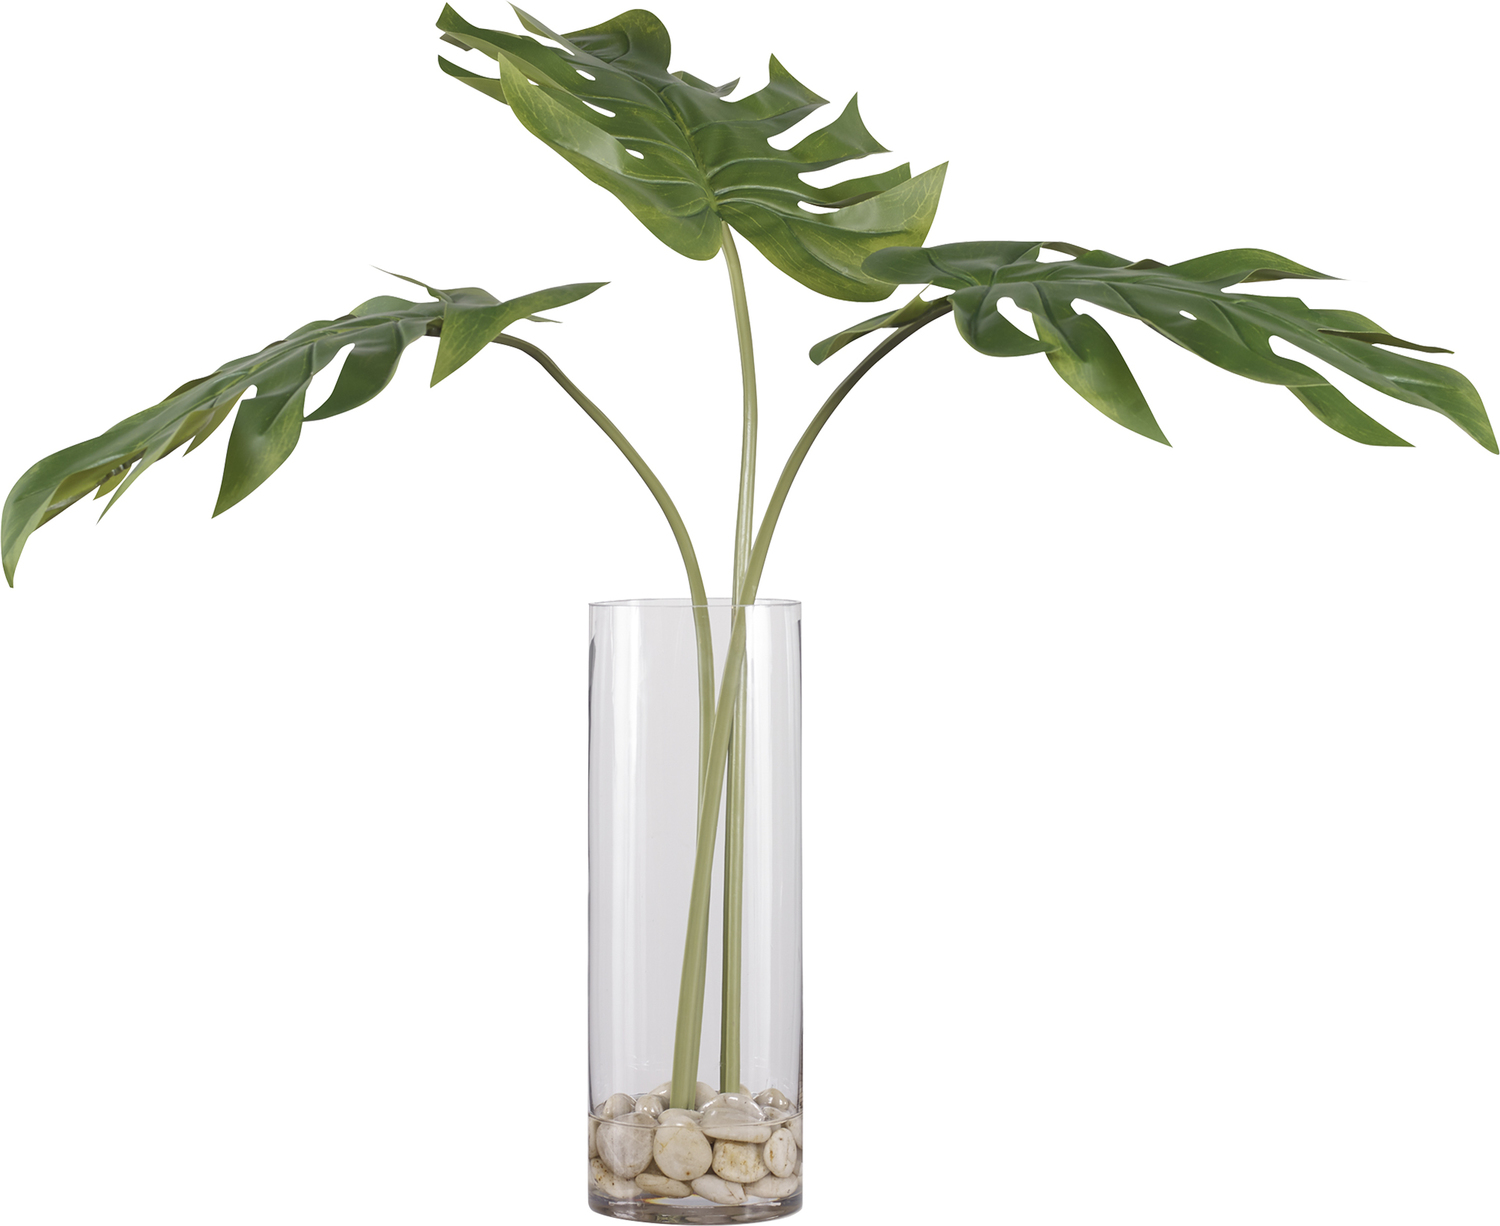 silk floral bouquets Uttermost Botanicals Contemporary Split Leaf Palm Trio Artfully Arranged In A Clear Glass Cylinder Vase With Natural Stones And Faux Water.